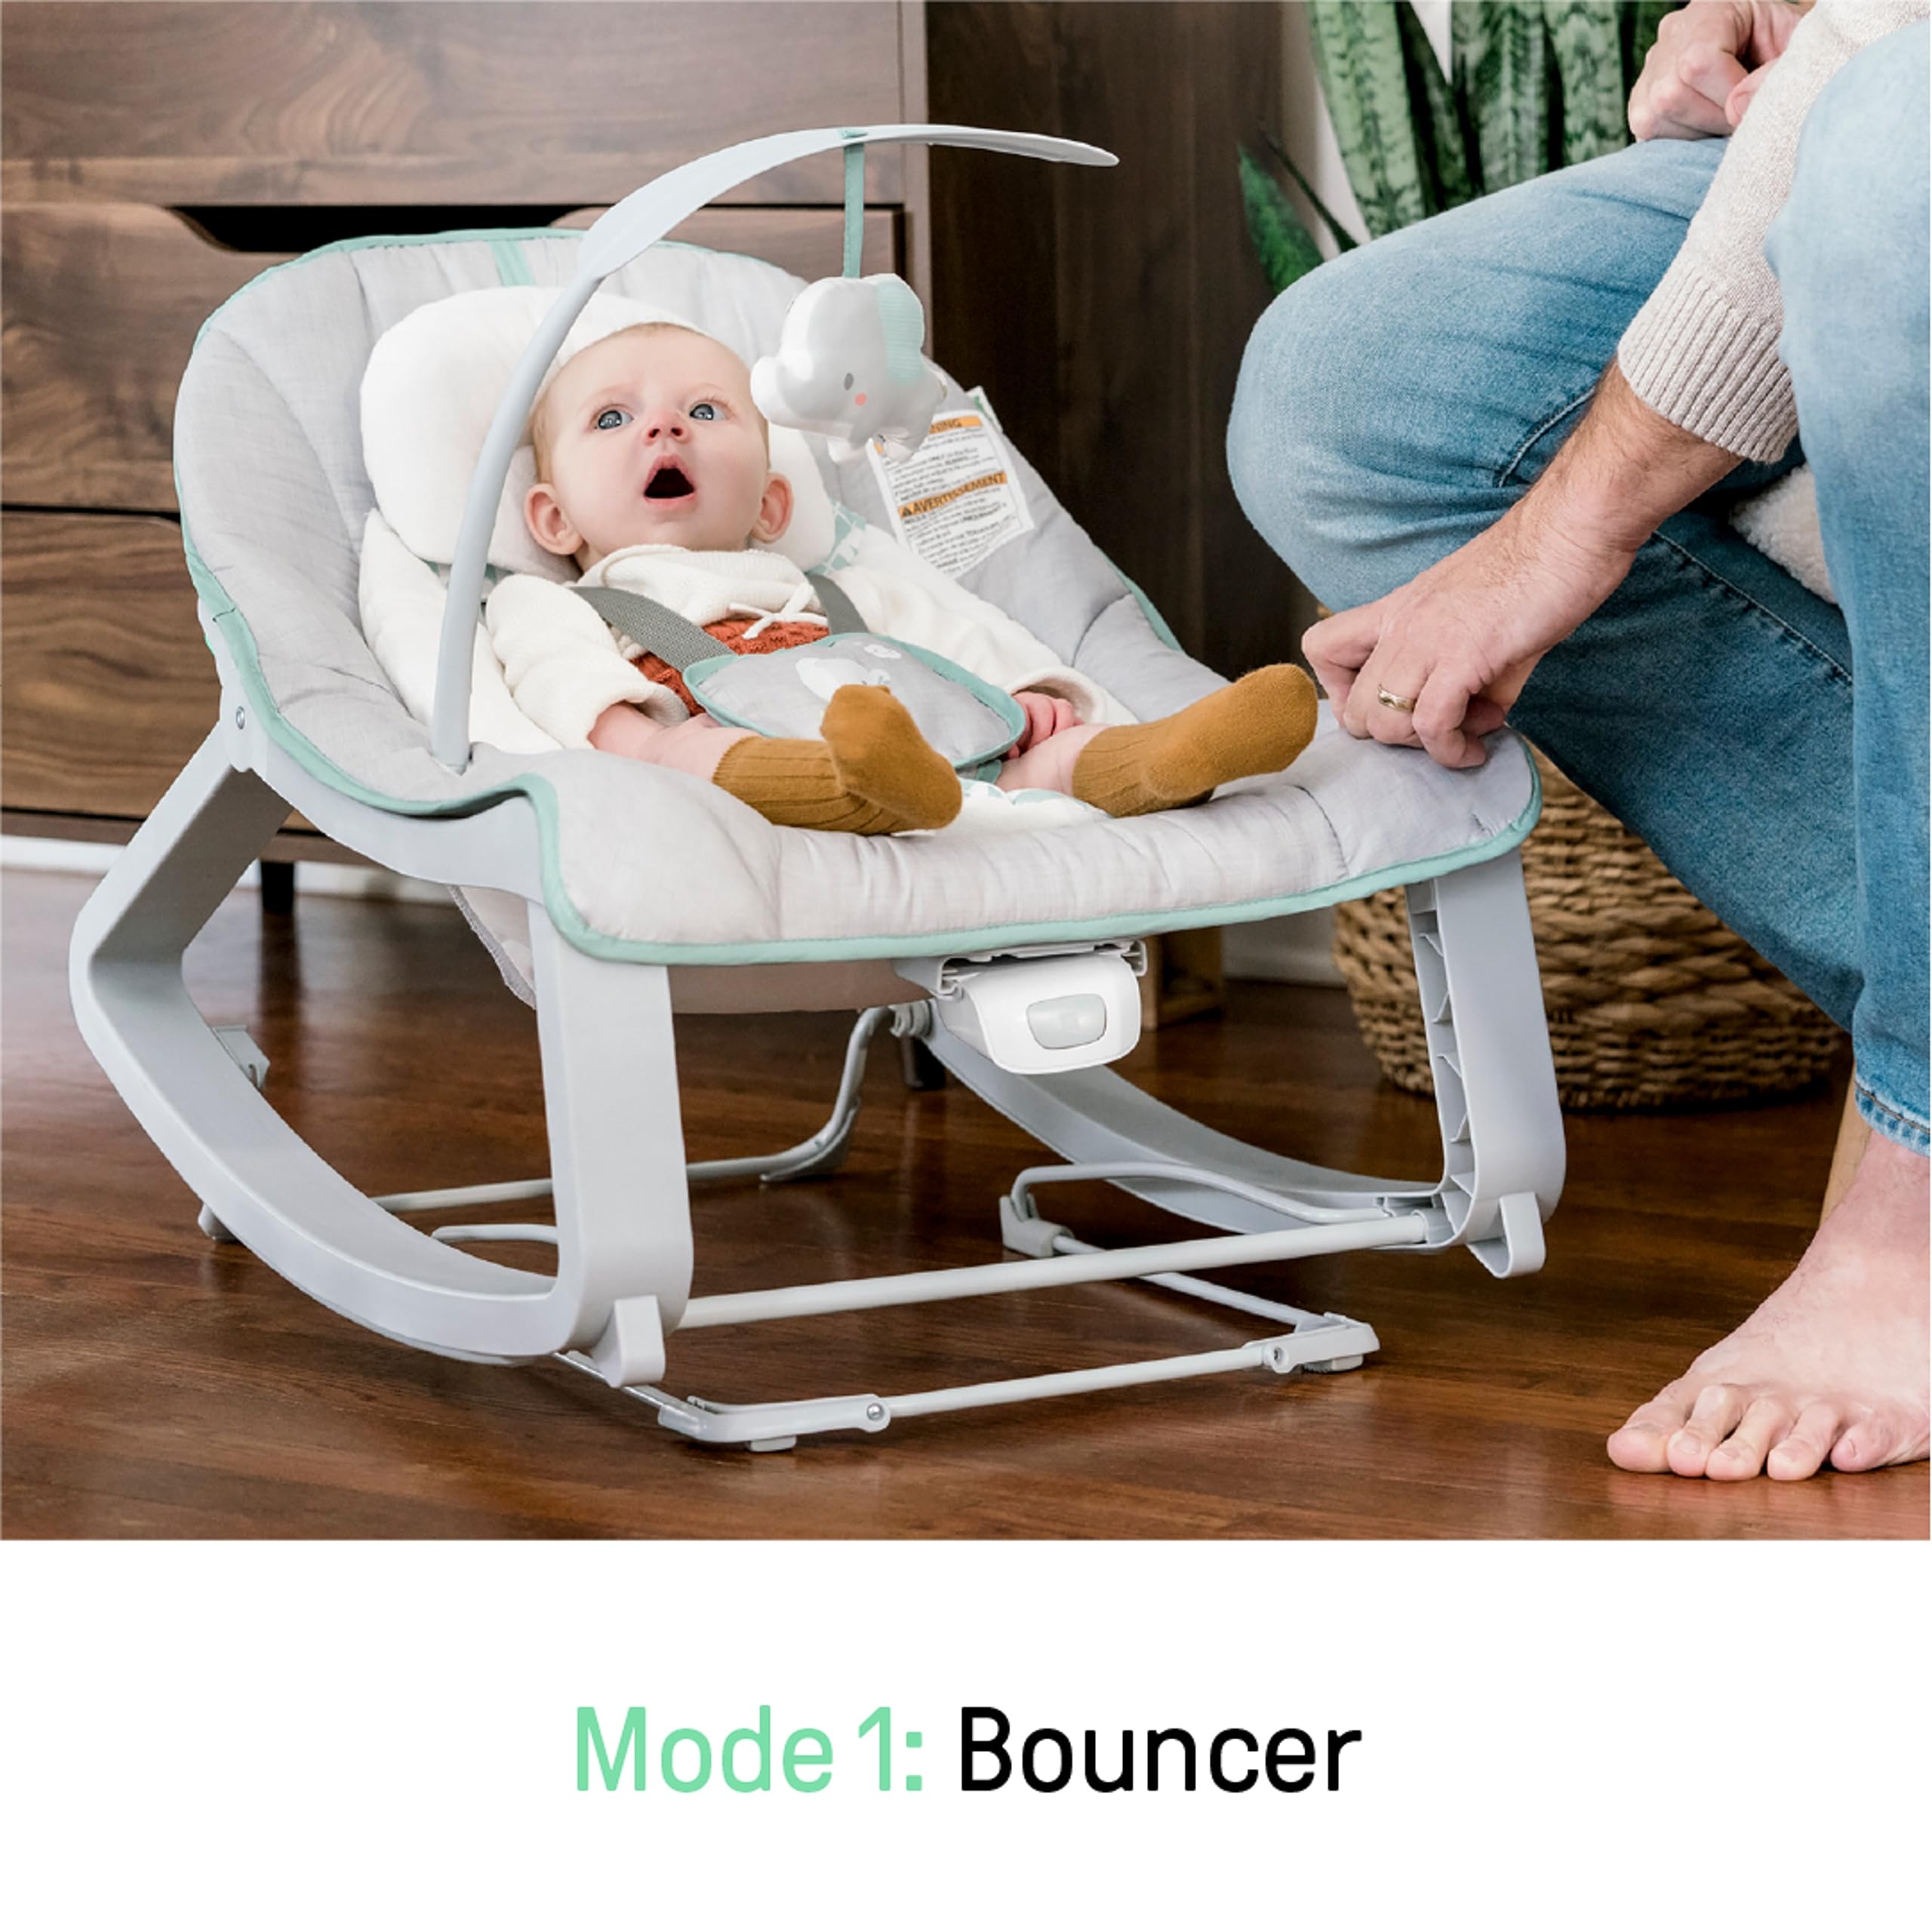 Ingenuity Keep Cozy 3-in-1 Grow with Me Vibrating Baby Bouncer, Seat & Infant to Toddler Rocker, Vibrations & -Toy Bar, 0-30 Months Up to 40 lbs (Weaver)